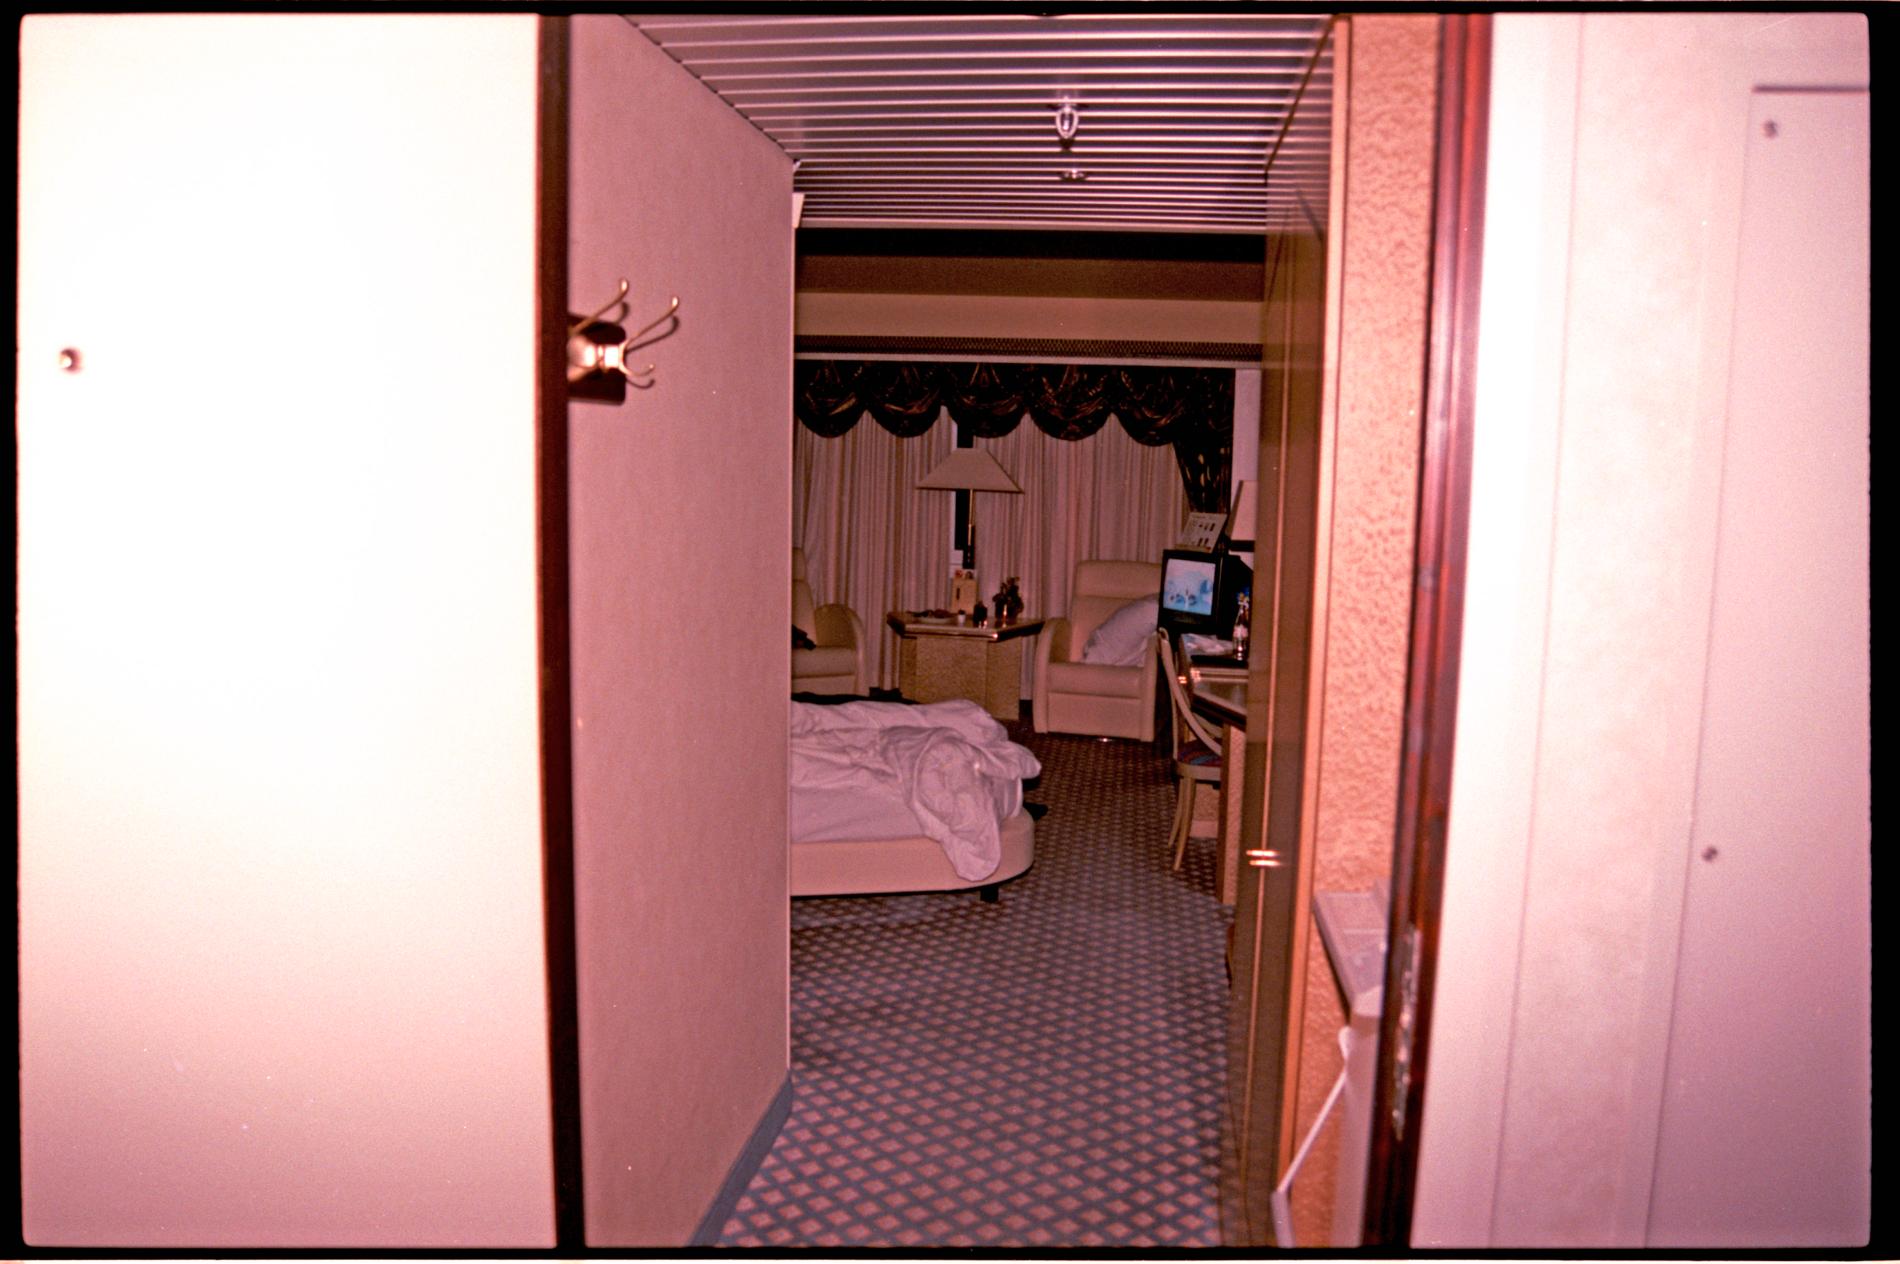 WHERE SHE DIED: What the police saw on entering Room 2805 on 3 June 1995. Photo: POLICE.